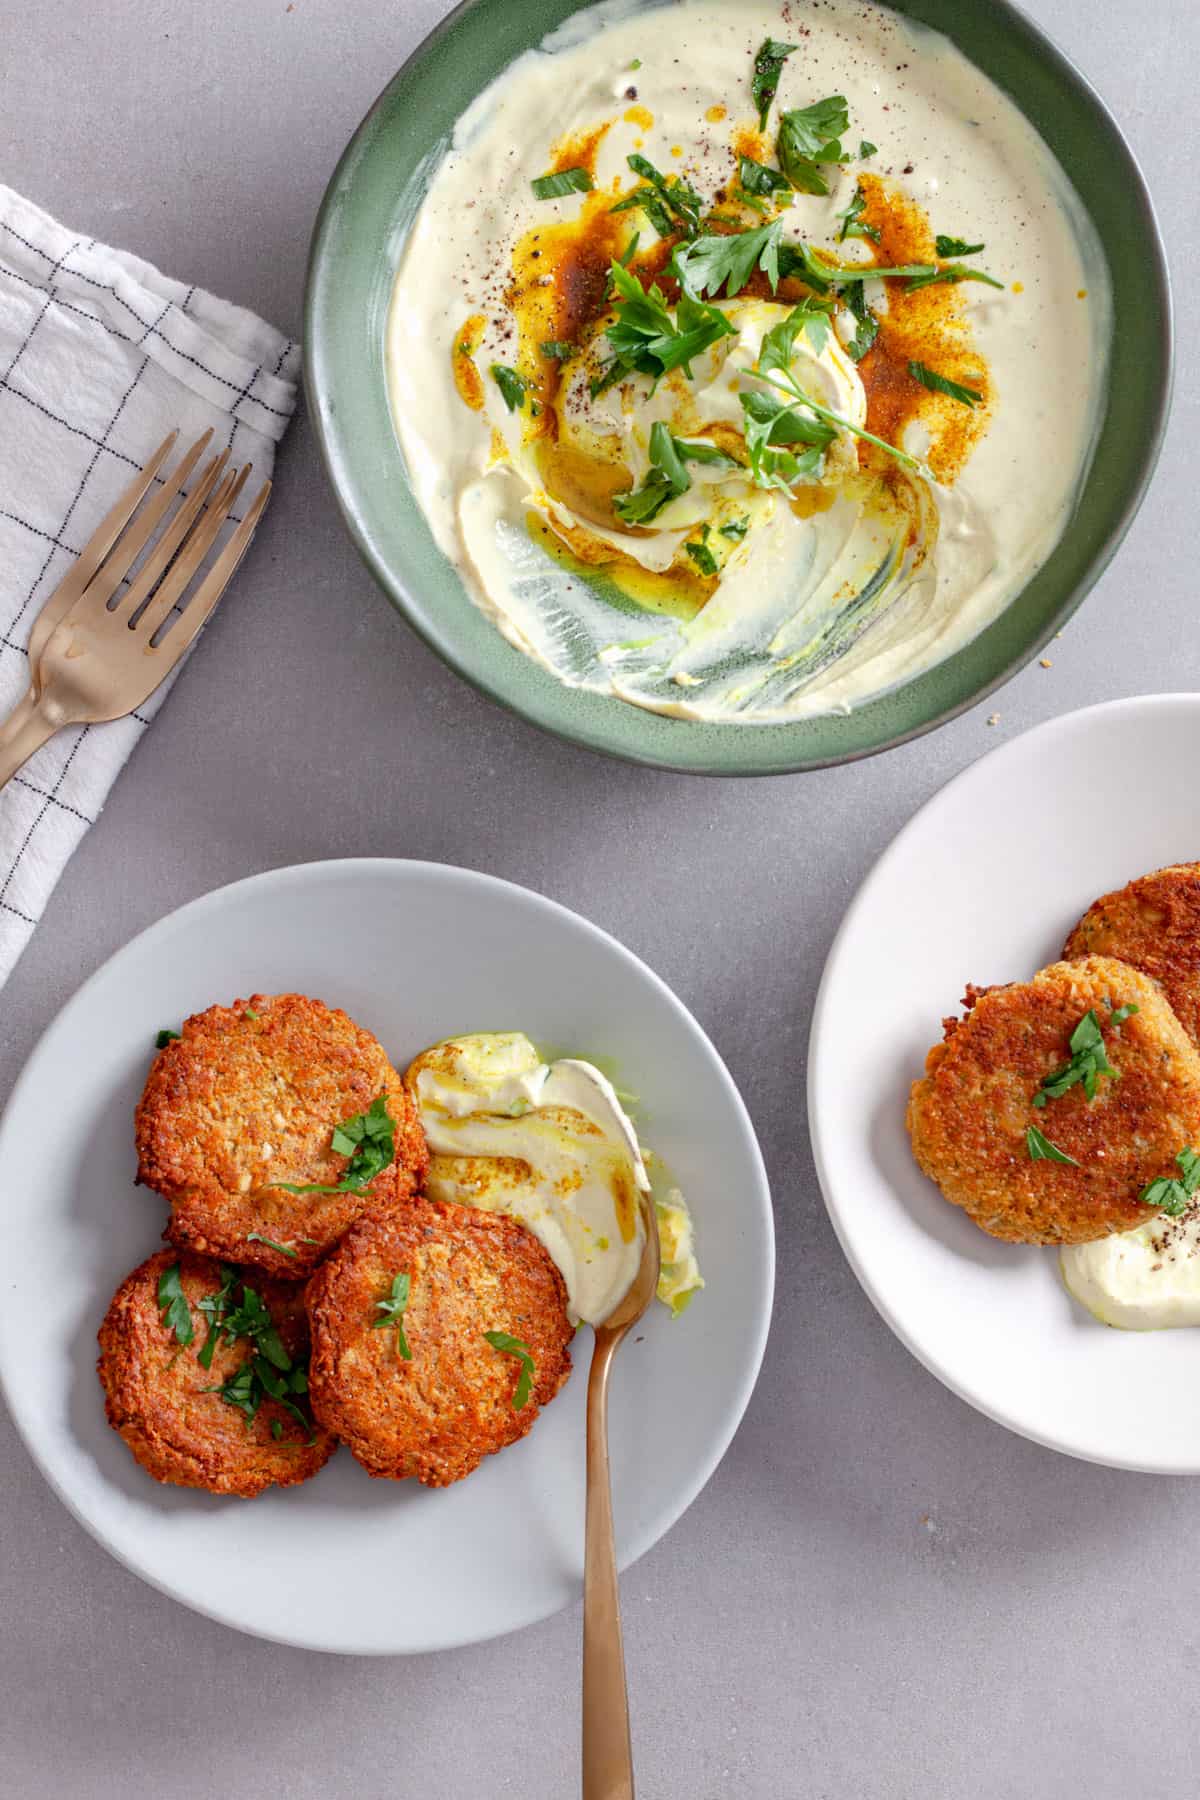 A couple plates of red lentil fritters topped with fresh herbs and a creamy tahini yogurt sauce on the side.